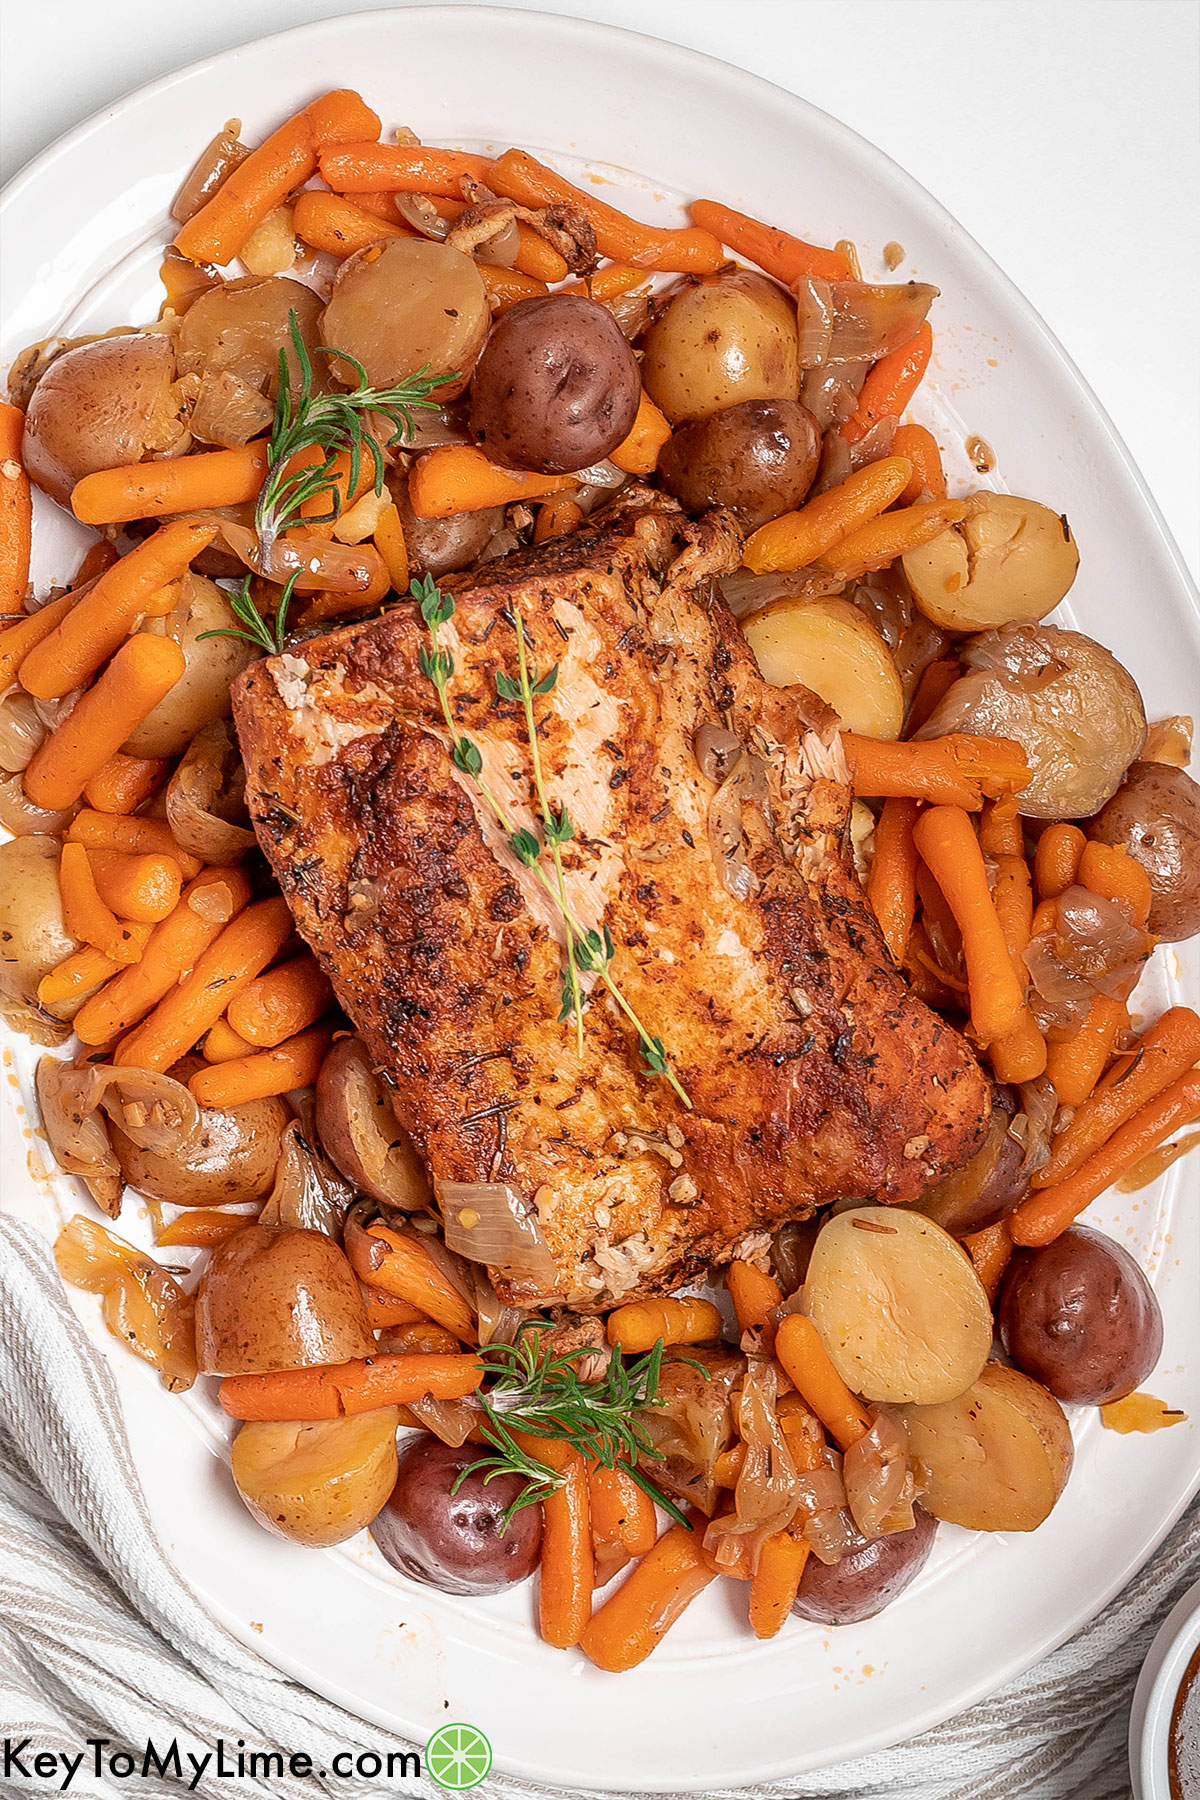 An overhead image of a fully cooked pork loin garnished with fresh rosemary and vegetables throughout.